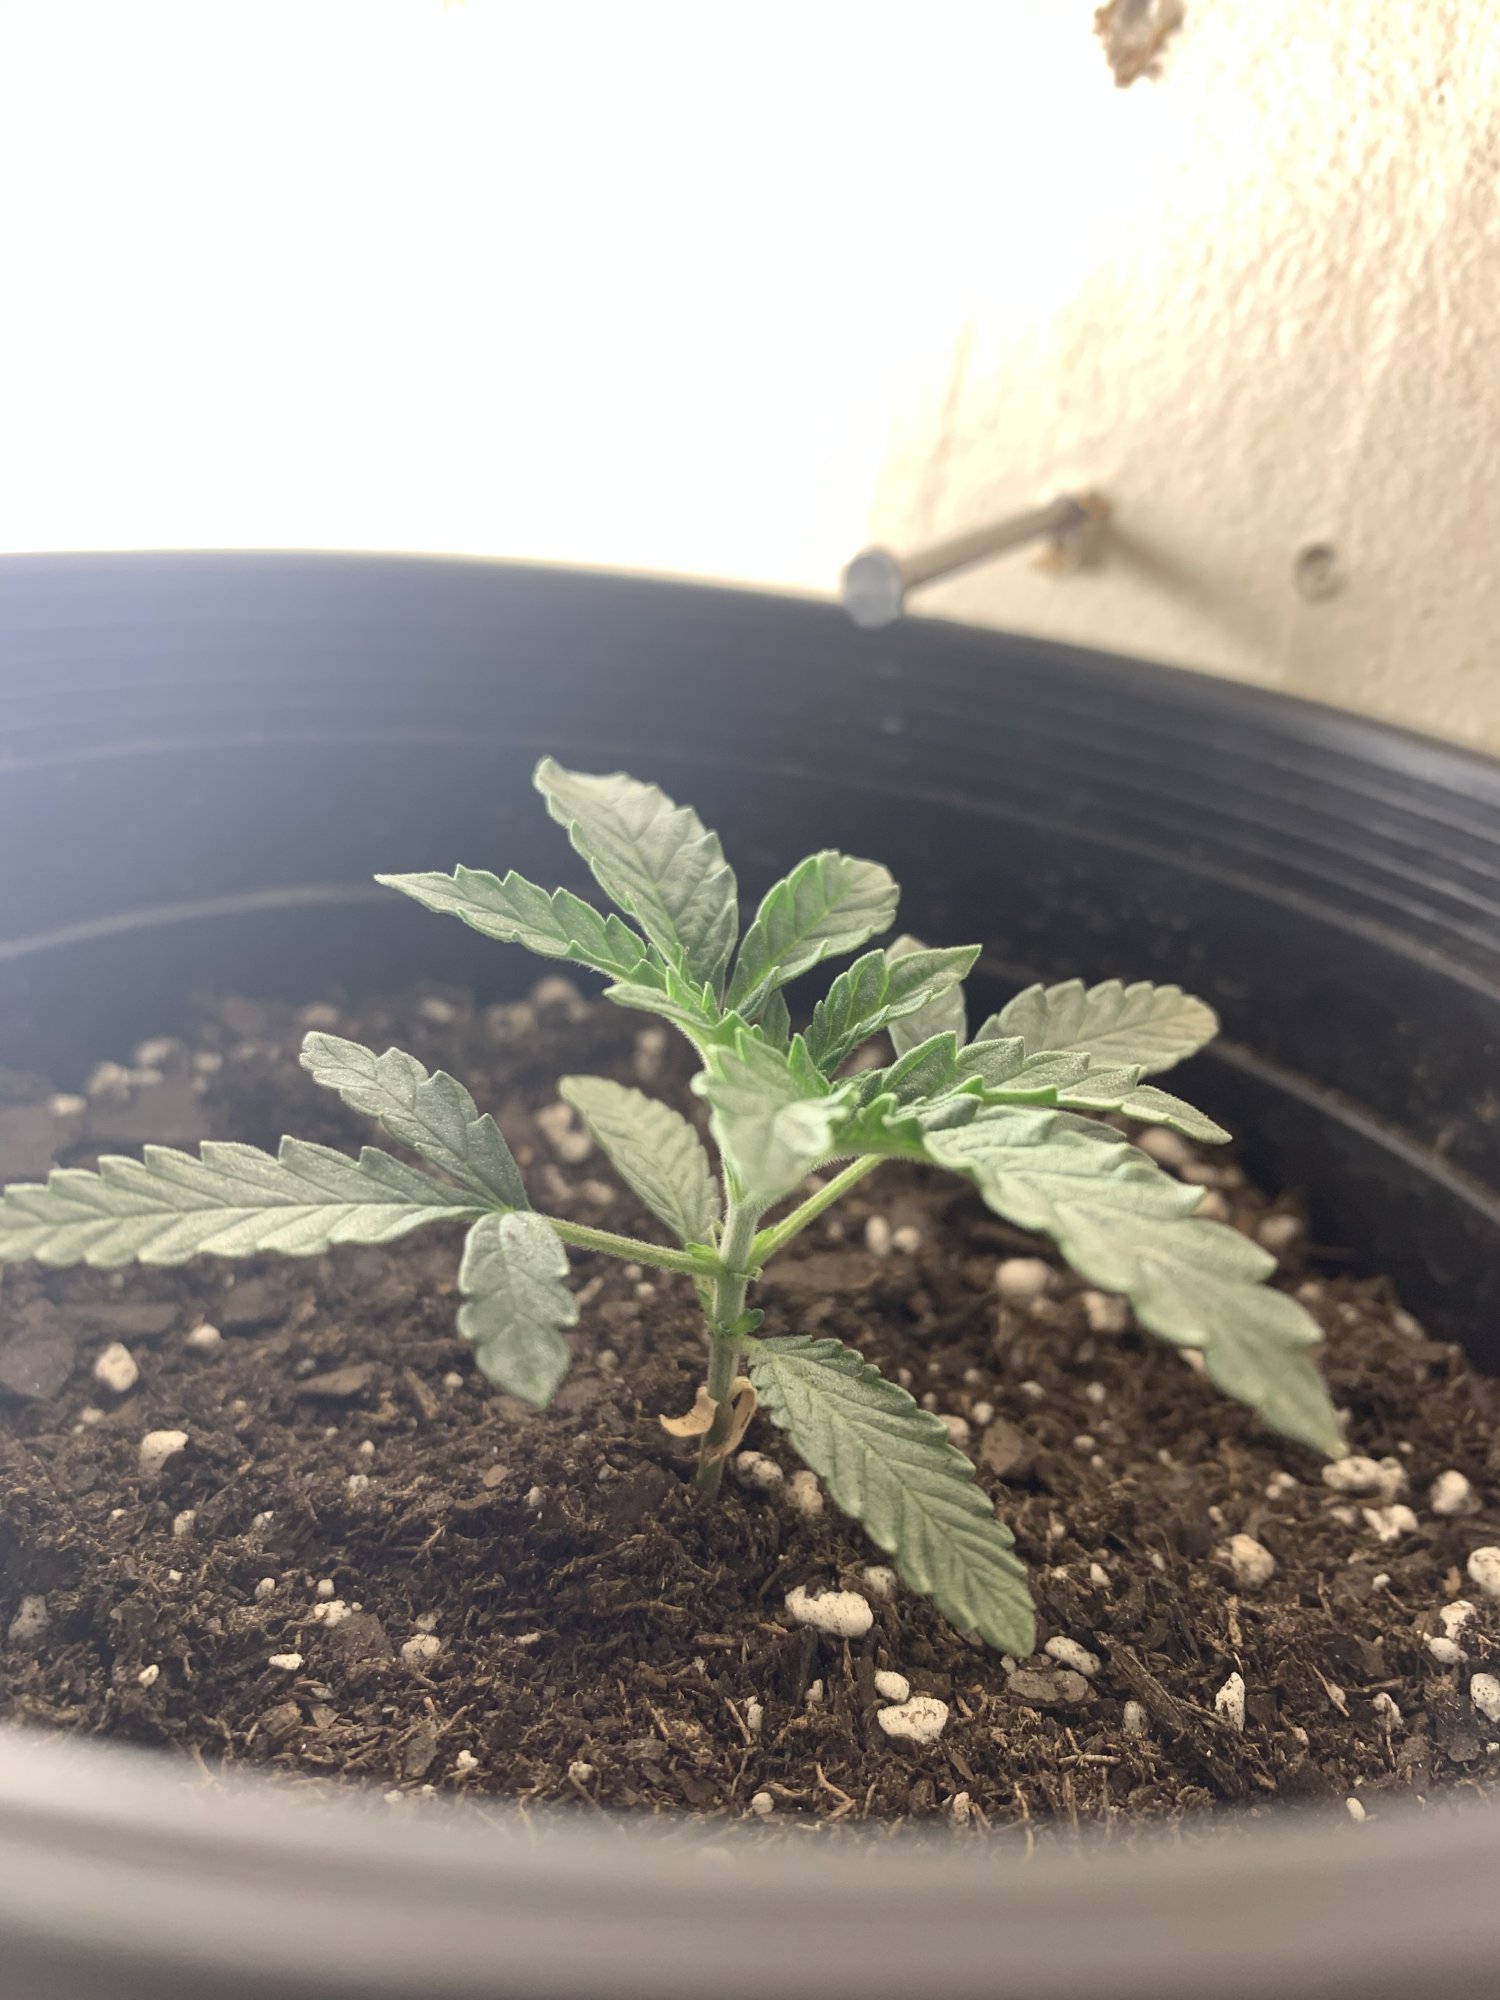 Whats wrong with my seedlings 11